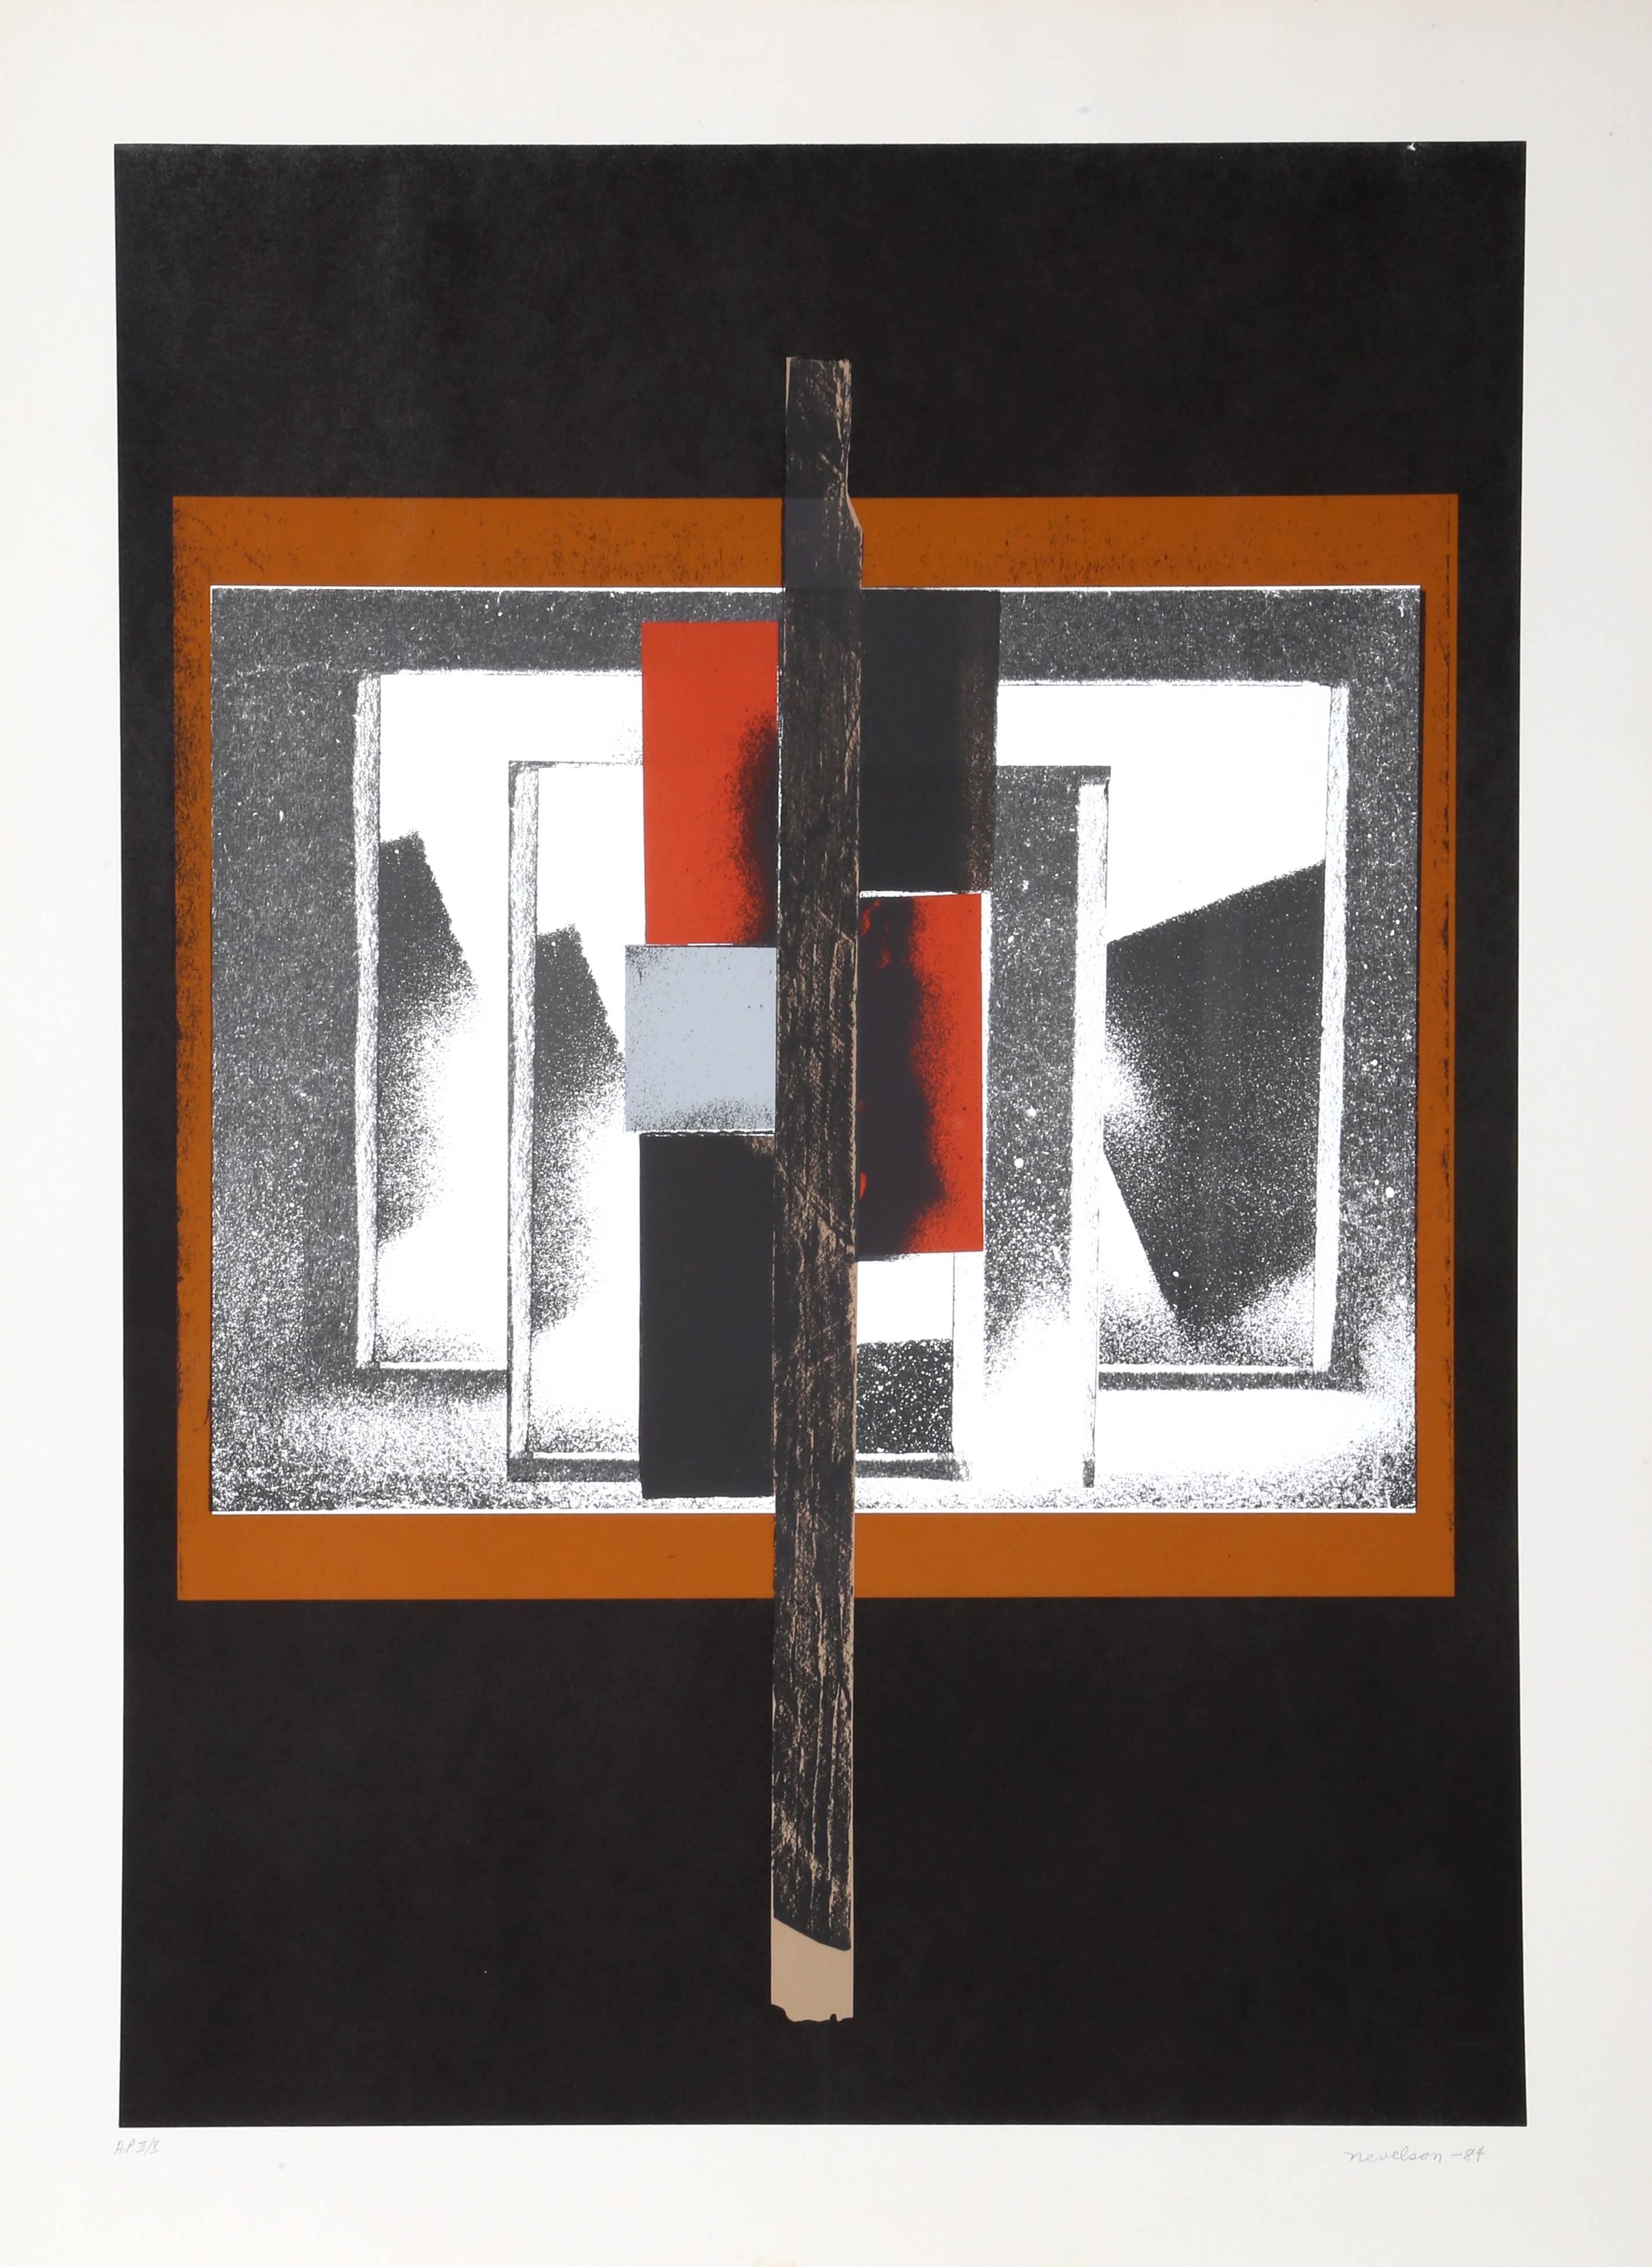 Artist: Louise Nevelson, Russian/American (1899 - 1988)
Title: untitled 
Year: 1984
Medium: Silkscreen, signed and numbered in pencil
Edition: AP X
Image Size: 34 x 24 inches
Size: 38.25 x 28 in. (97.16 x 71.12 cm)